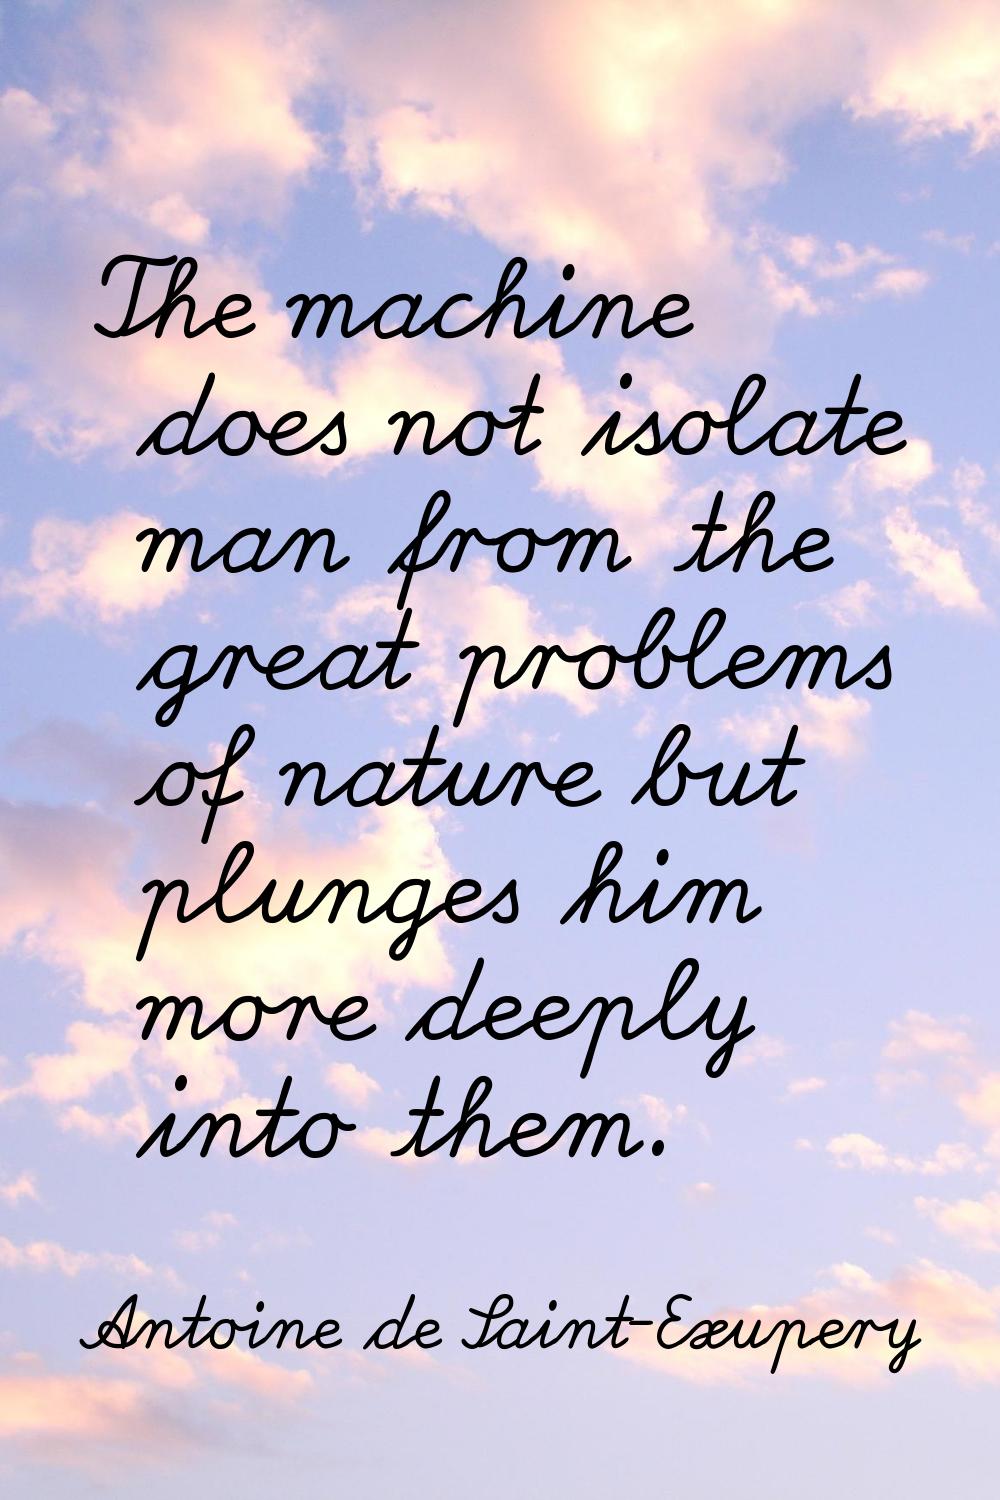 The machine does not isolate man from the great problems of nature but plunges him more deeply into